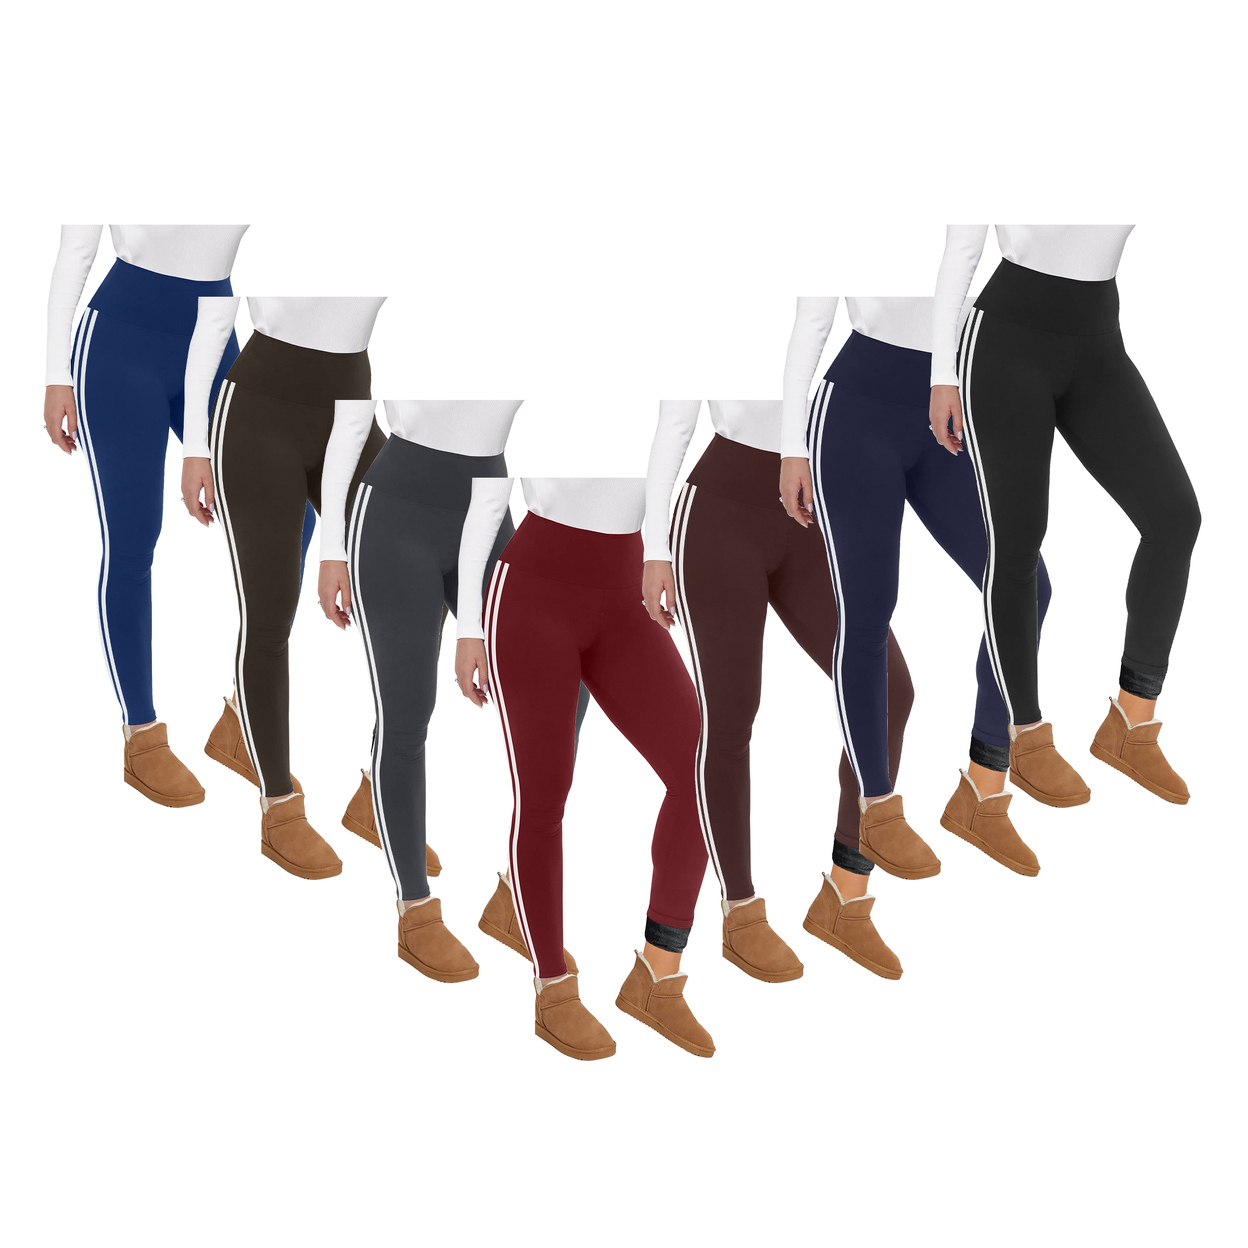 Multi-Pack: Women's Ultra Soft Winter Warm Cozy Striped Fur Lined Yoga Leggings - 1-pack, Assorted, X-large